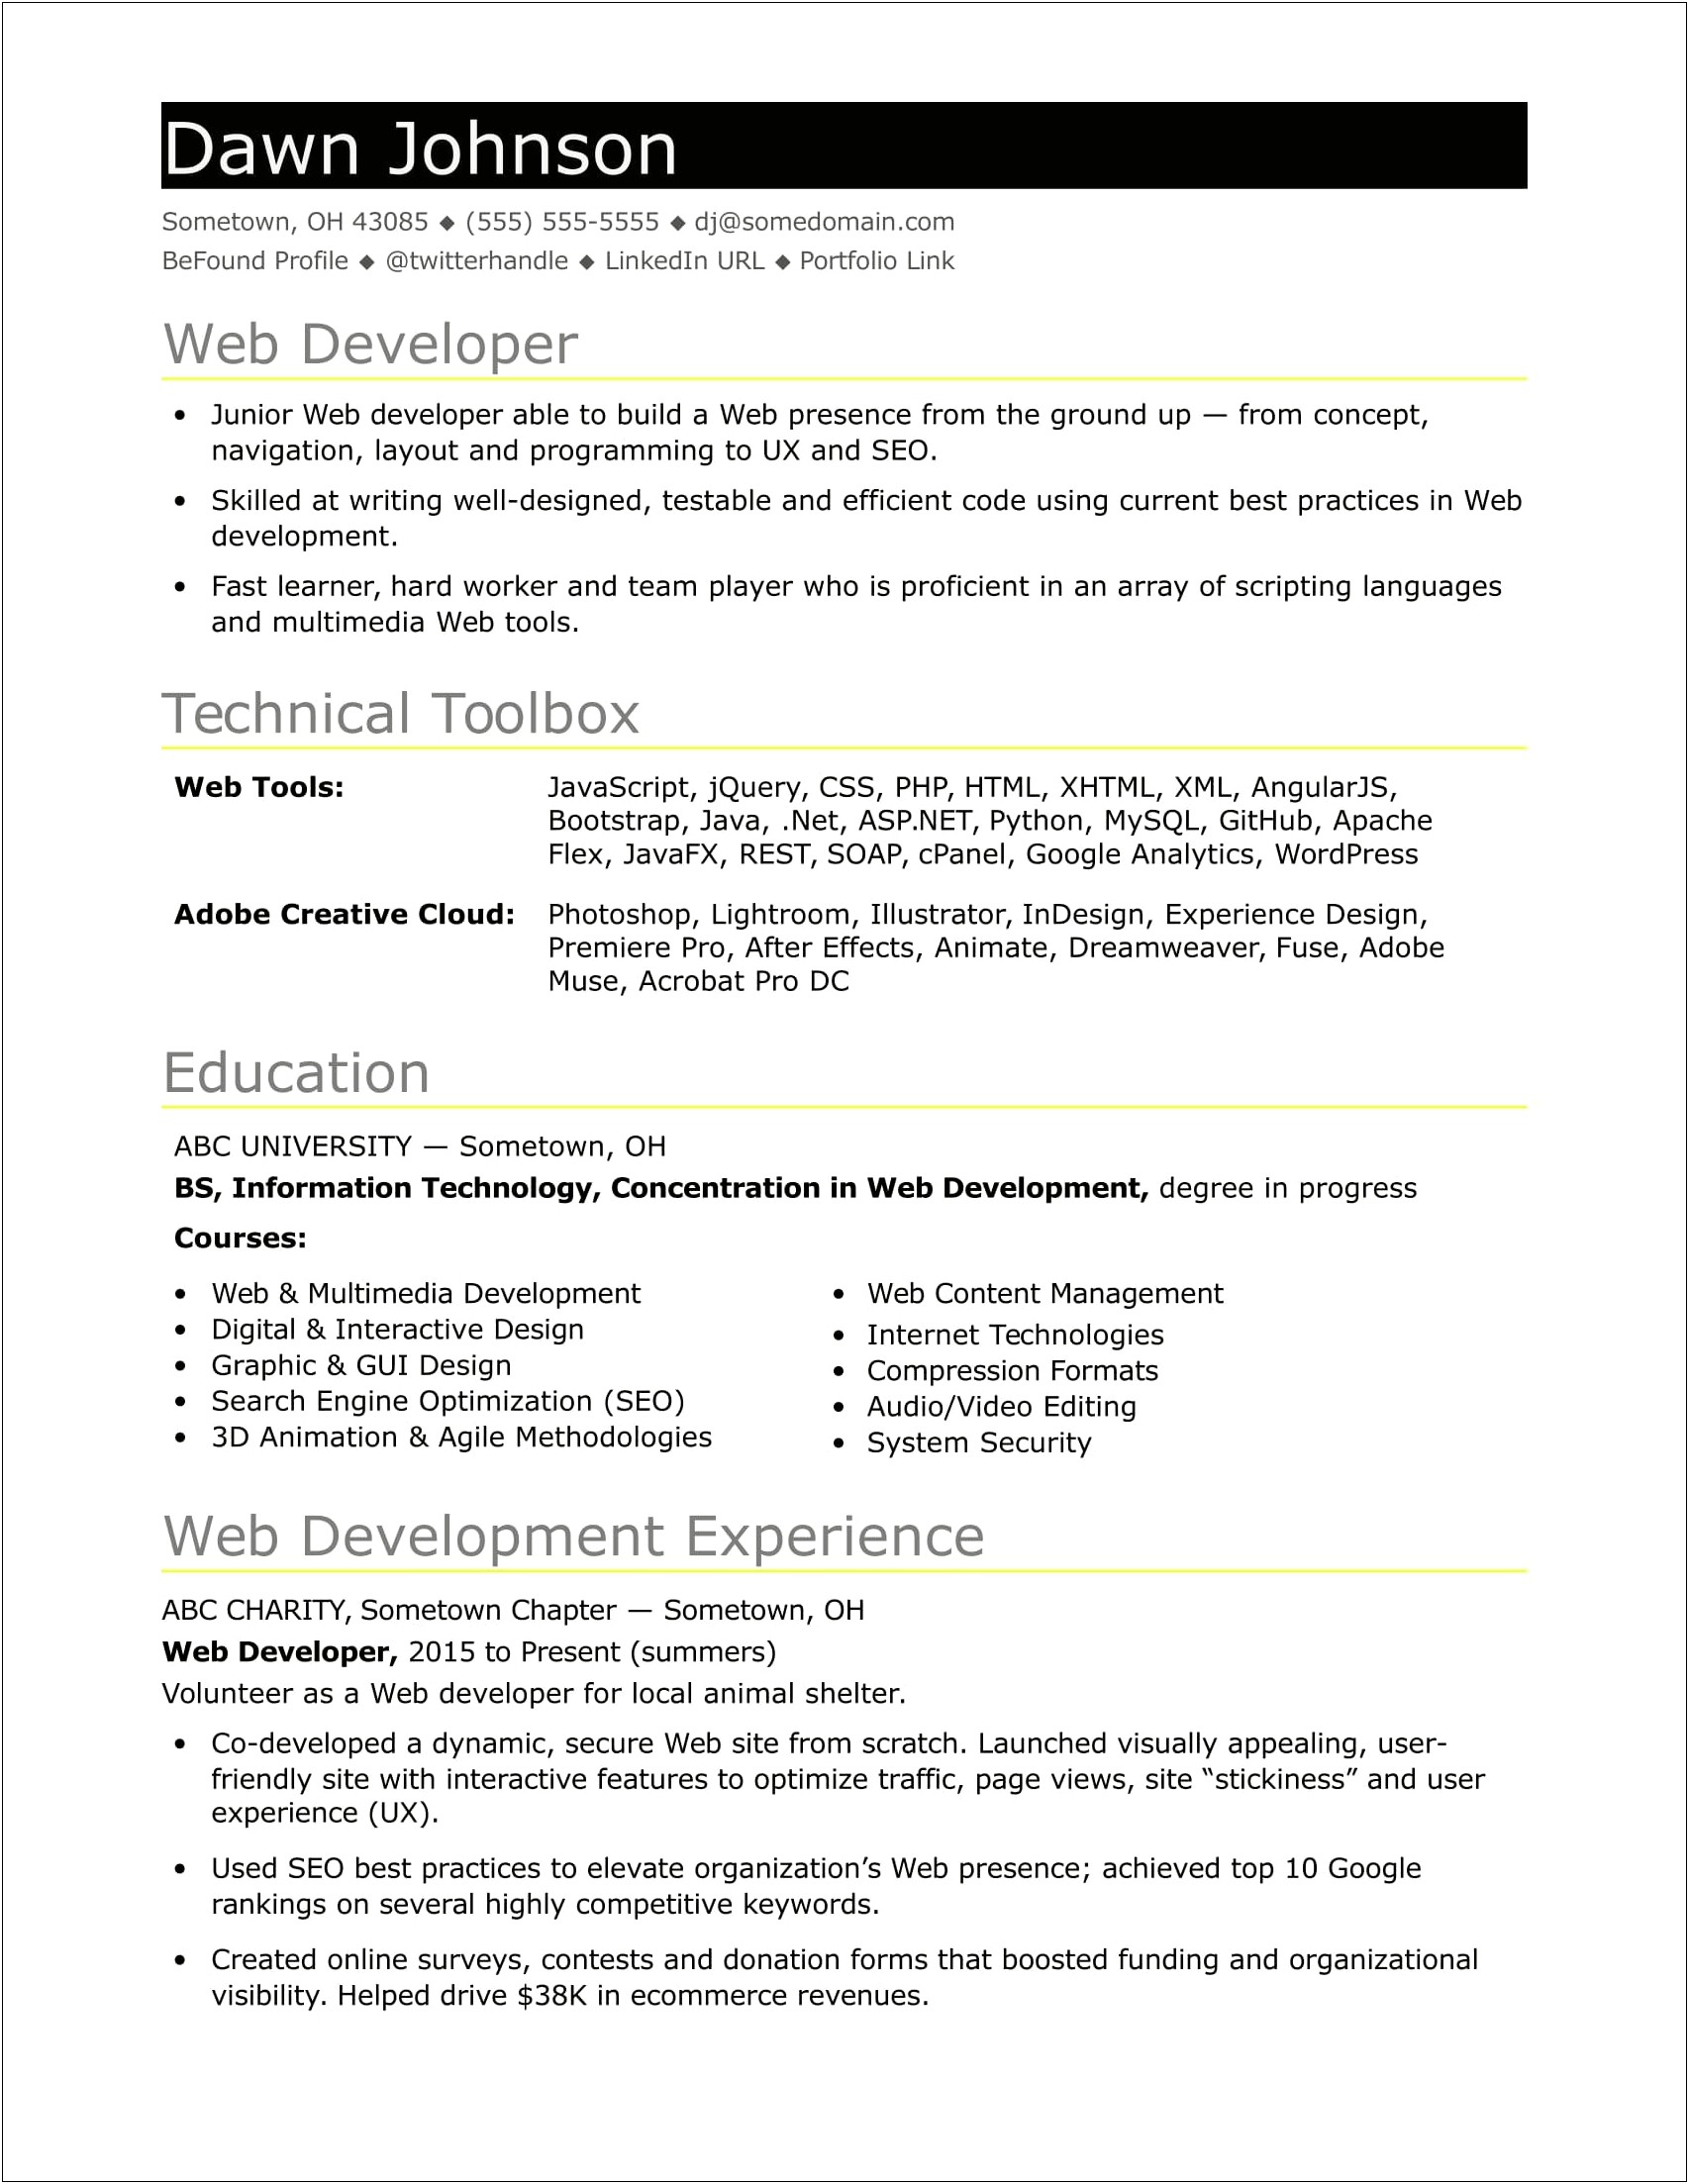 Descriptive Ways To Write Fast Learner On Resume